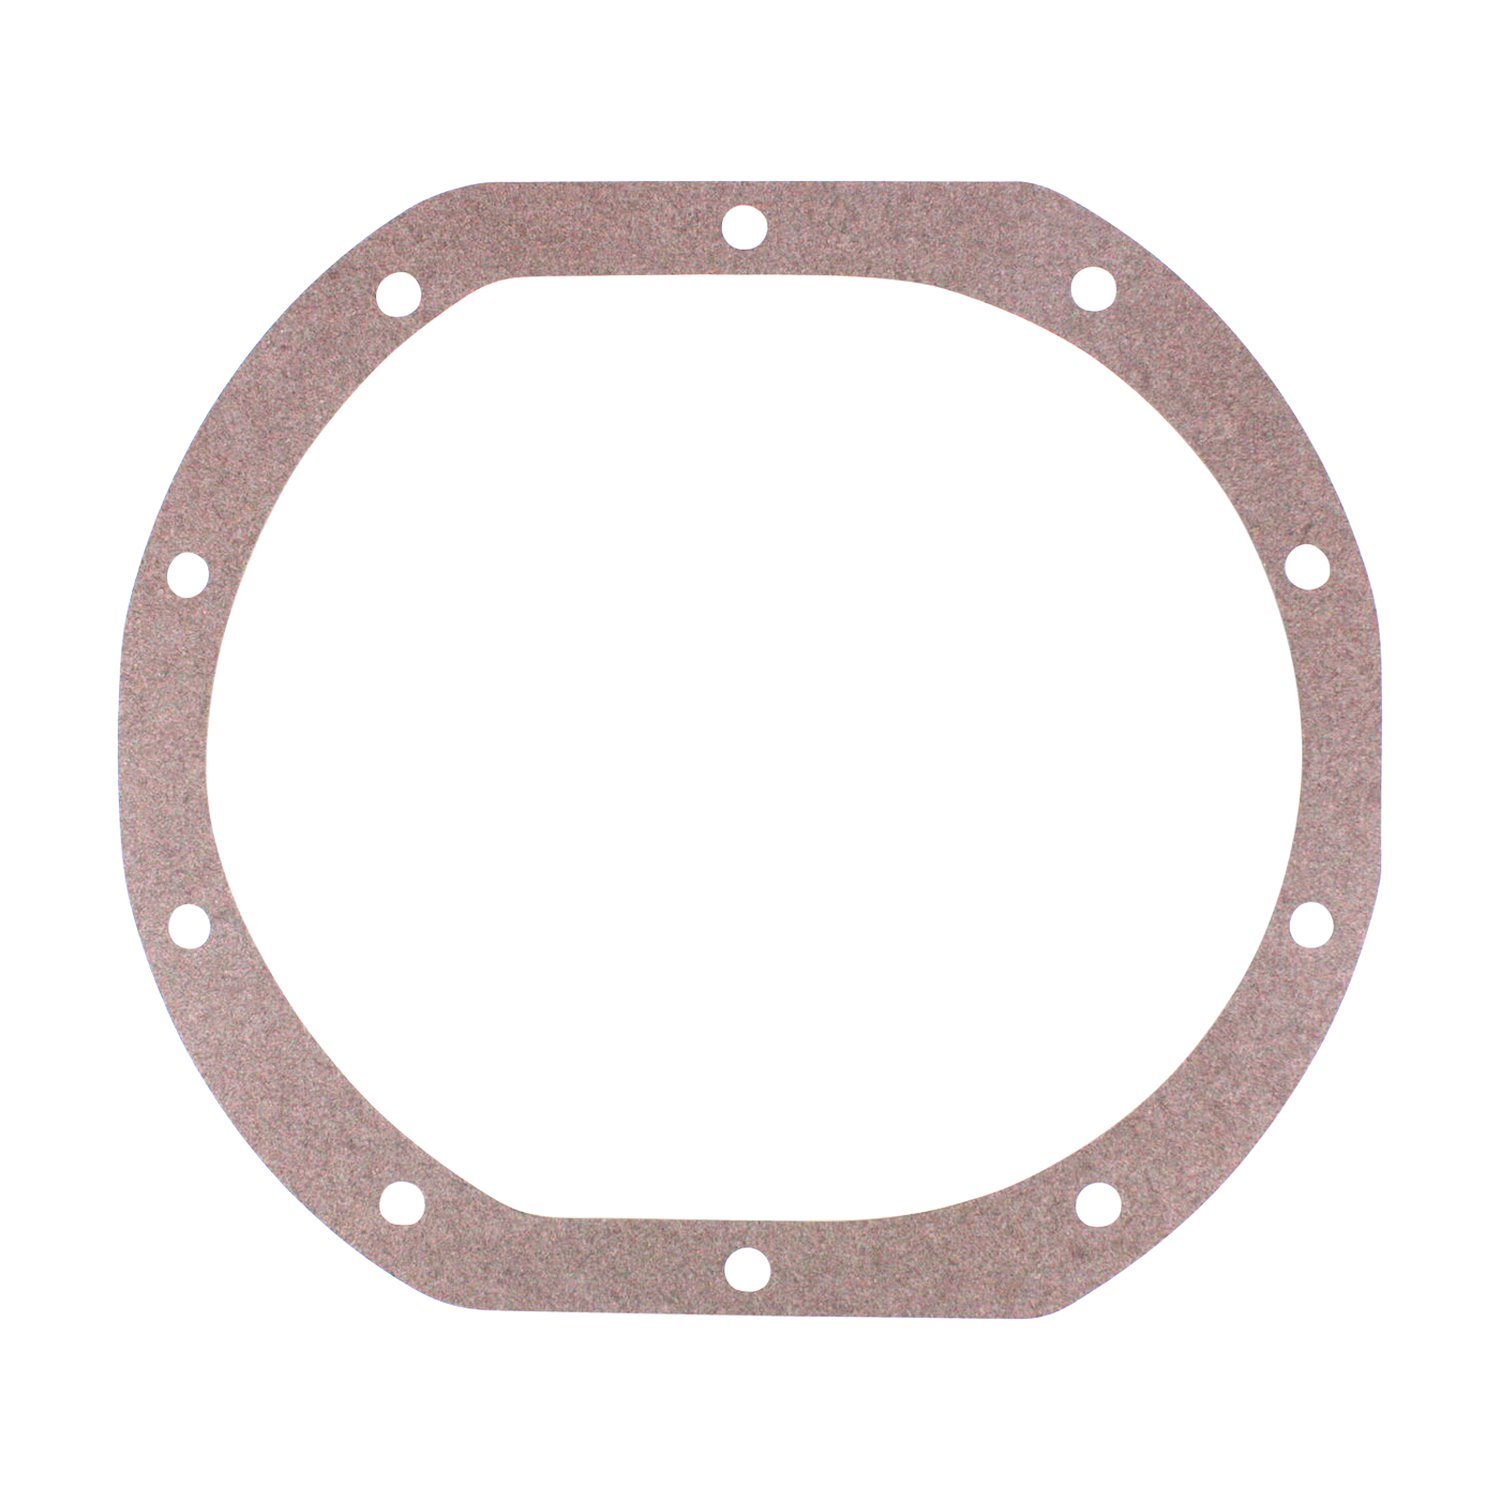 7.5 in. Ford Cover Gasket.